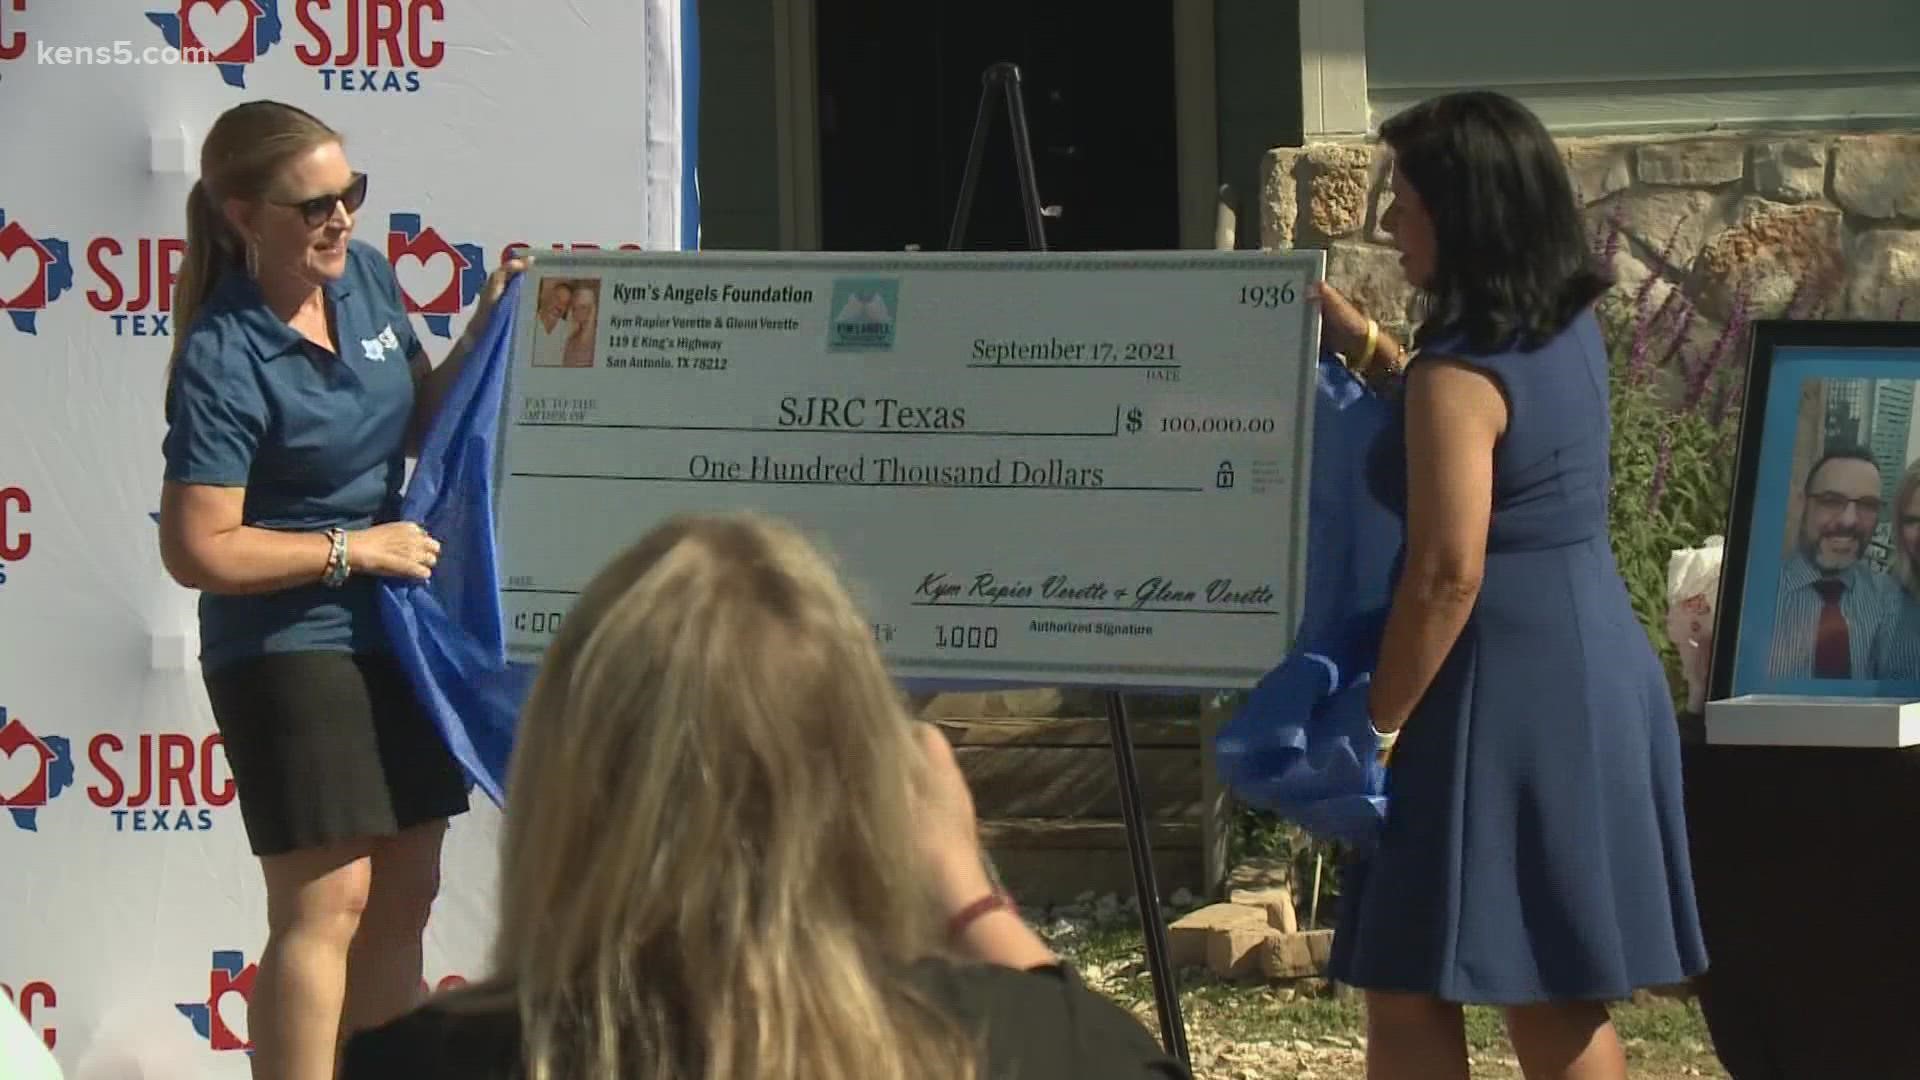 A south Texas philanthropist donated the large check to the nonprofit which helps local children who have been abused or neglected.